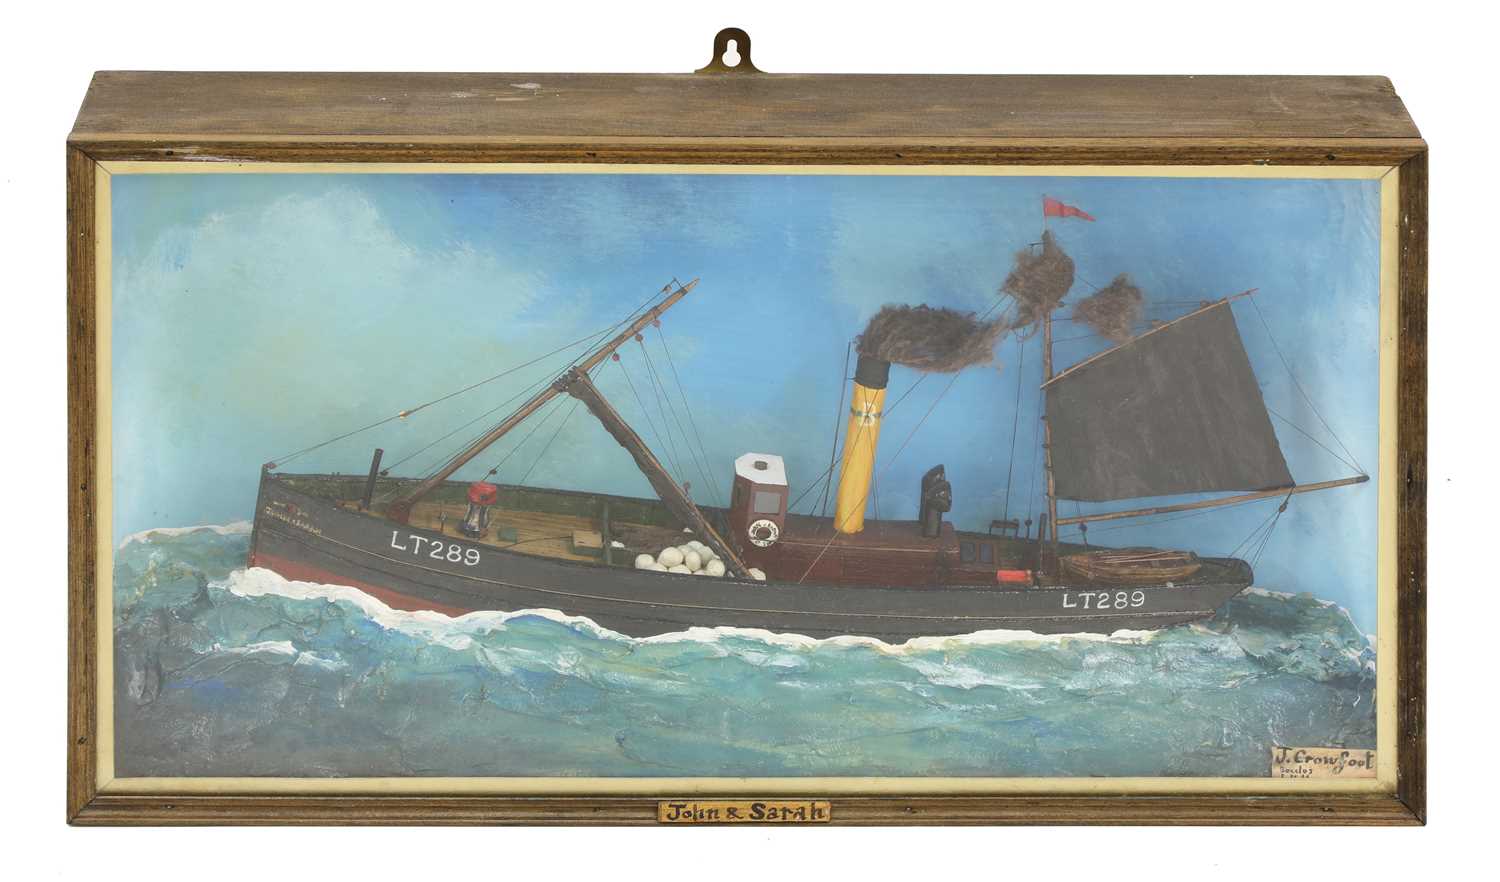 Lot 254 - A cased diorama of a trawler 'LT289' by J Crowfoot, Beccles, Suffolk